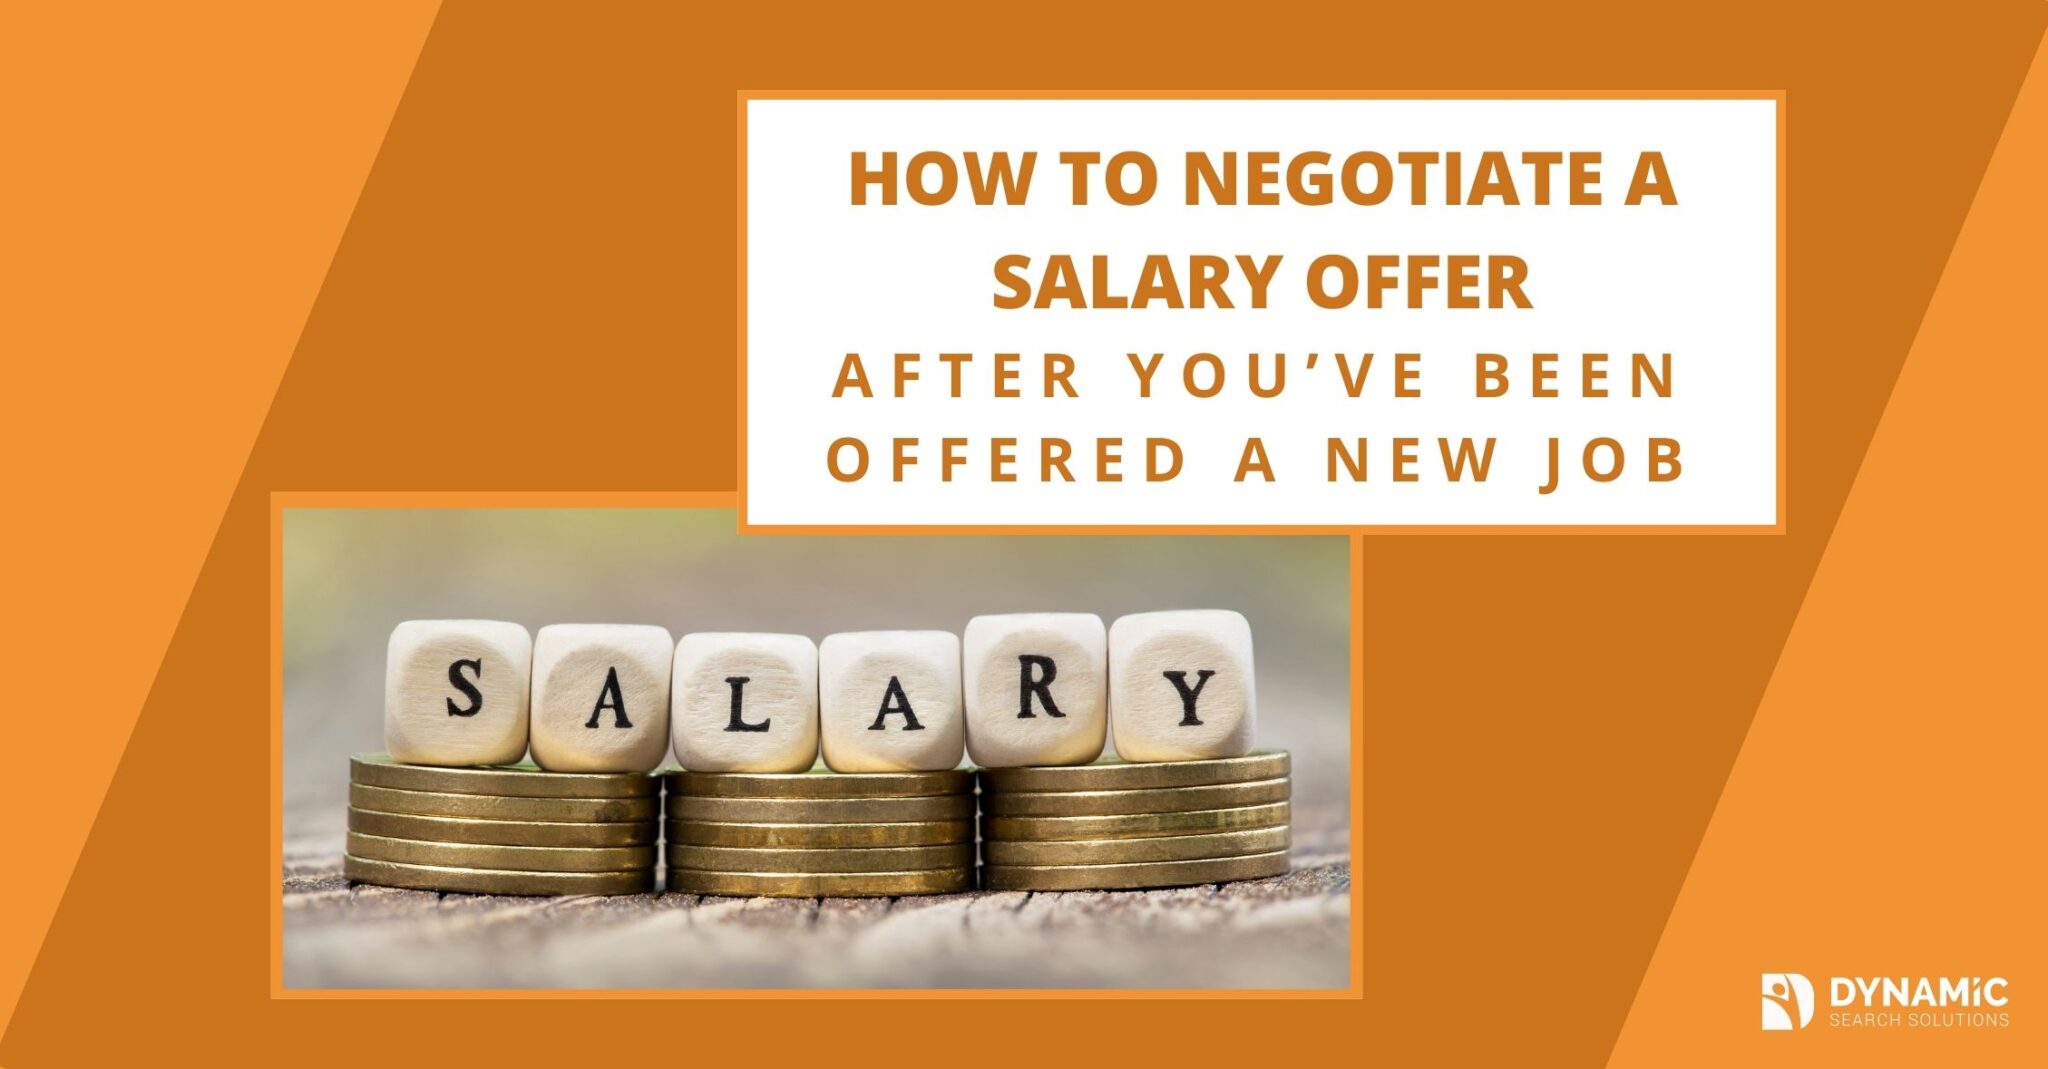 How To Negotiate a Salary After You’ve Been Offered a New Job